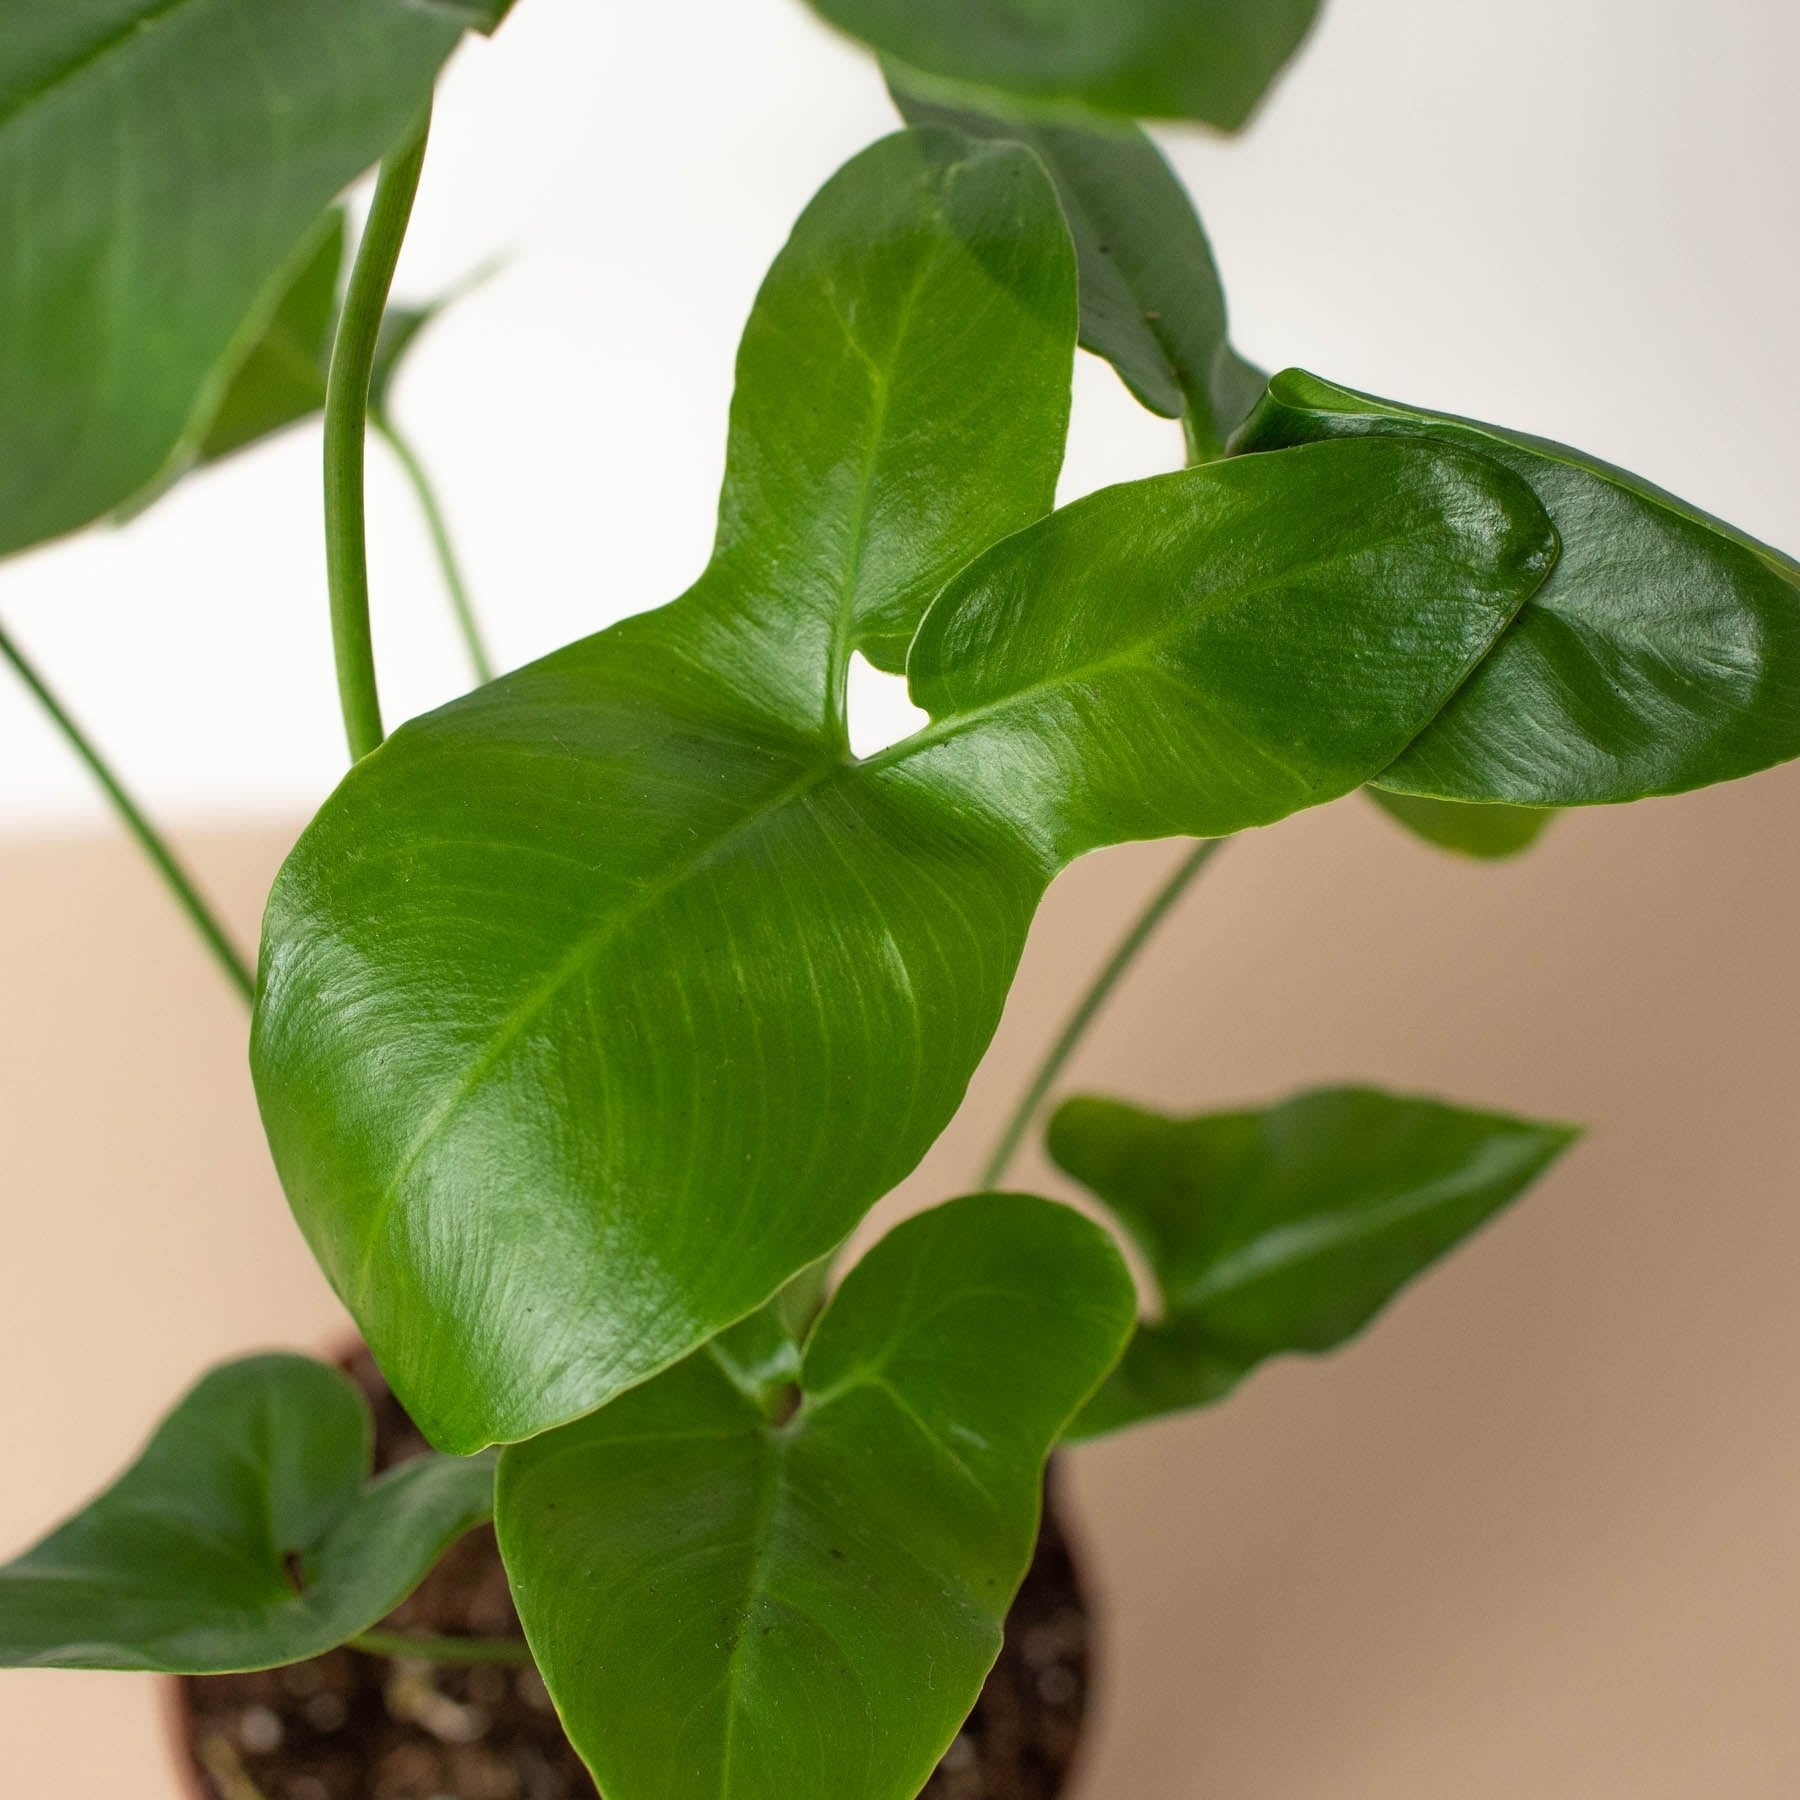 Philodendron Care